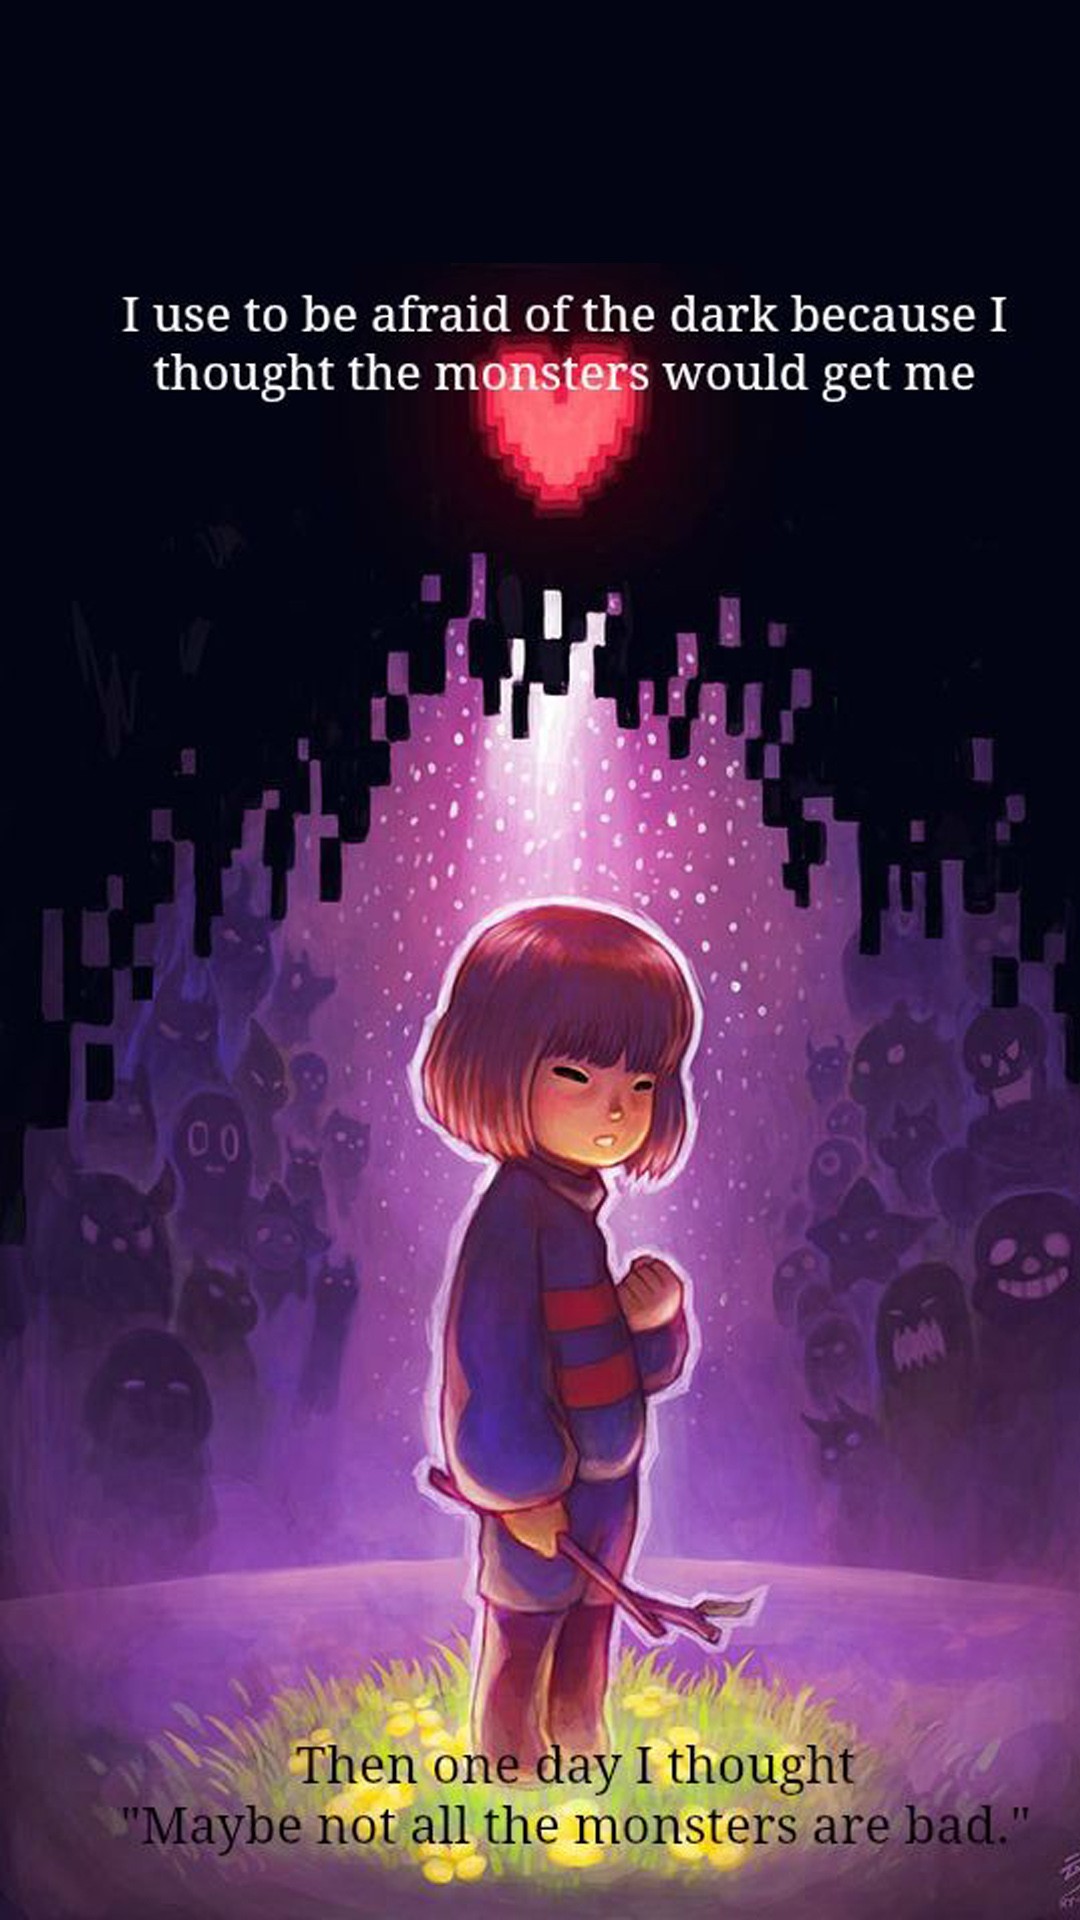 Undertale phone wallpaper ·① Download free backgrounds for desktop and